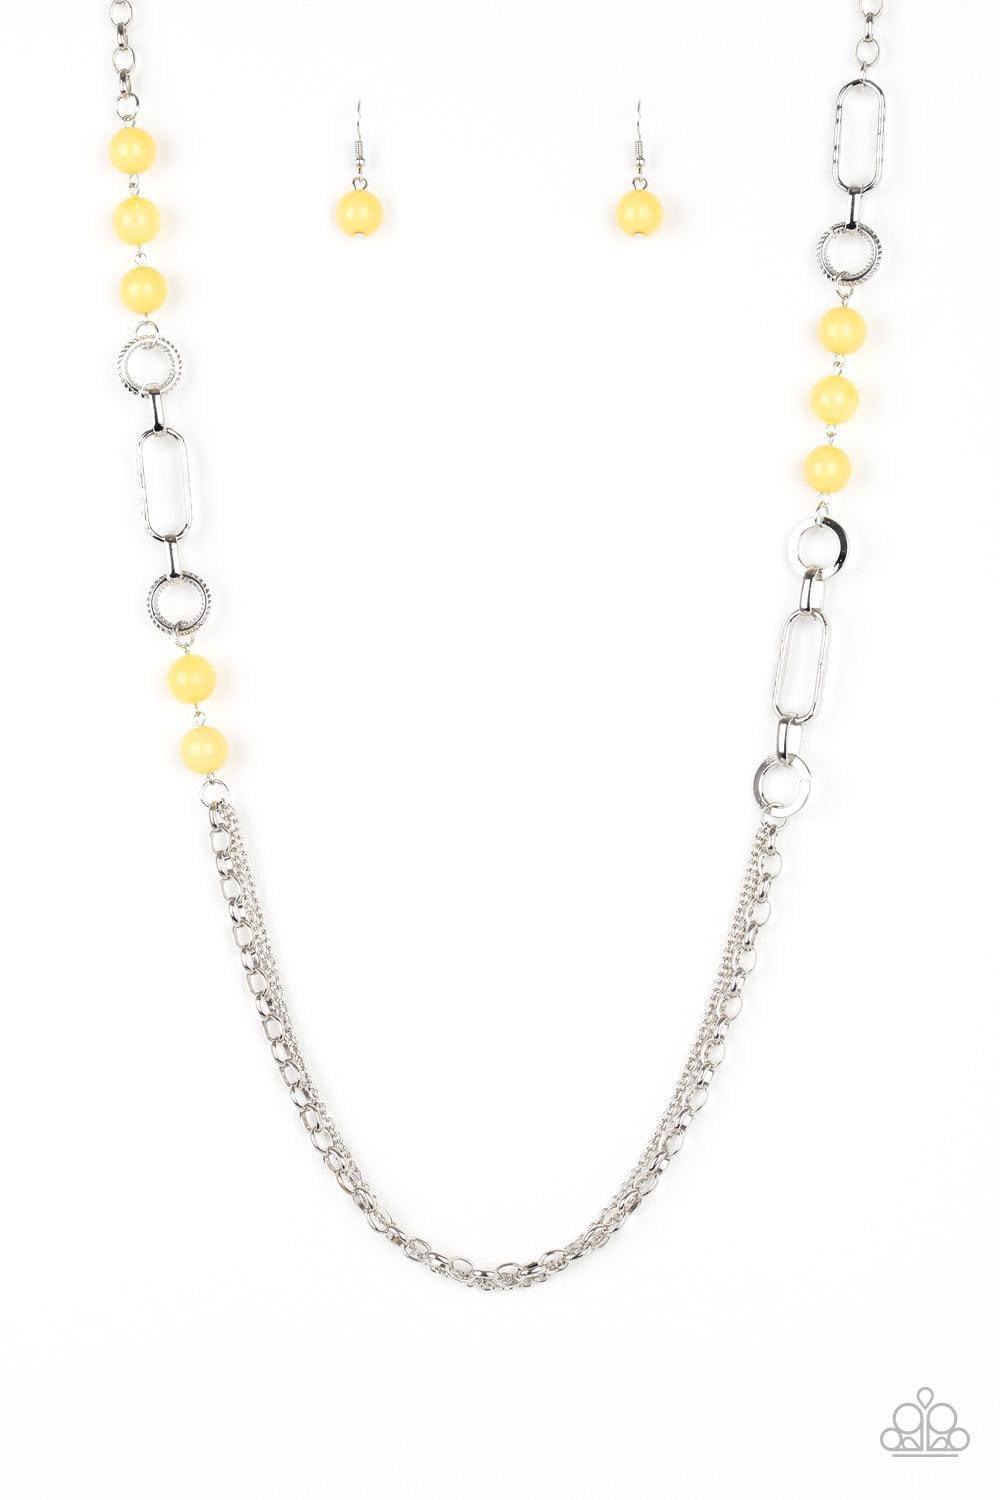 Paparazzi Accessories - Cache Me Out - Yellow Necklace - Bling by JessieK